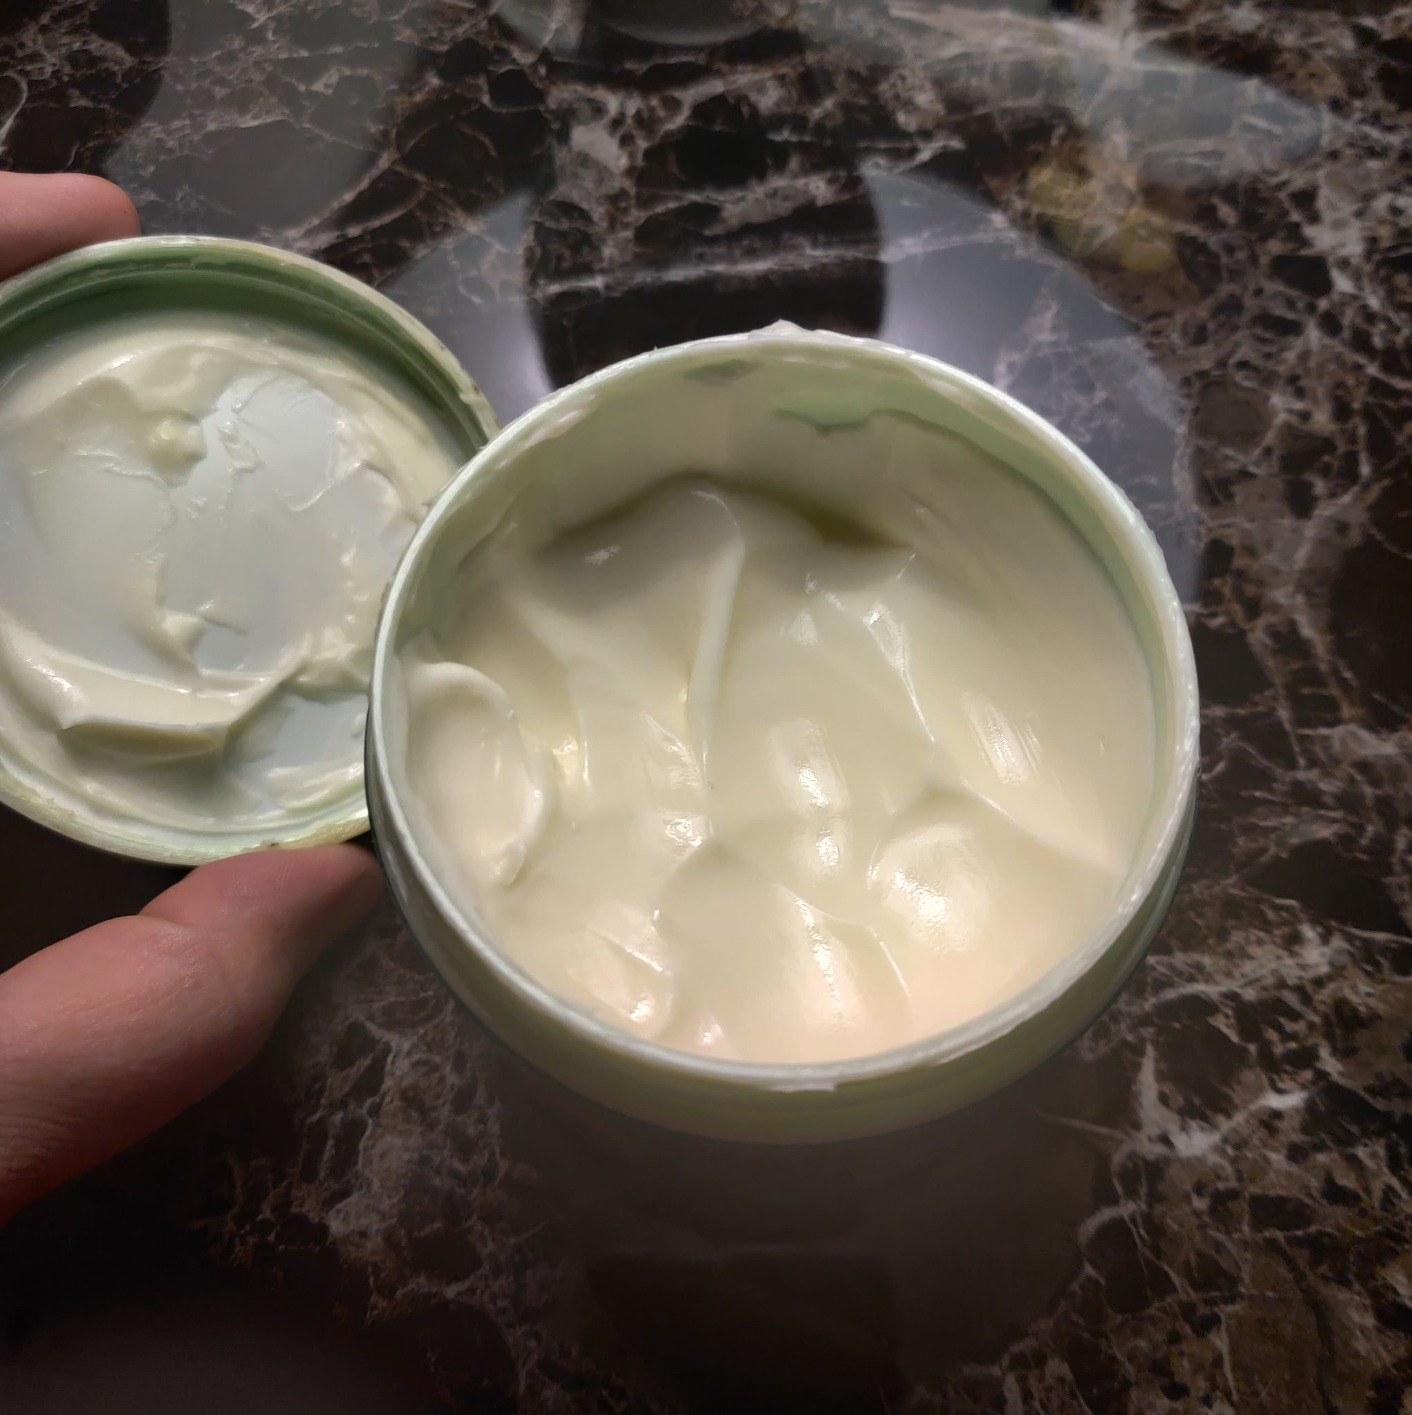 reviewer&#x27;s photo of the jar open showing thick and creamy body butter